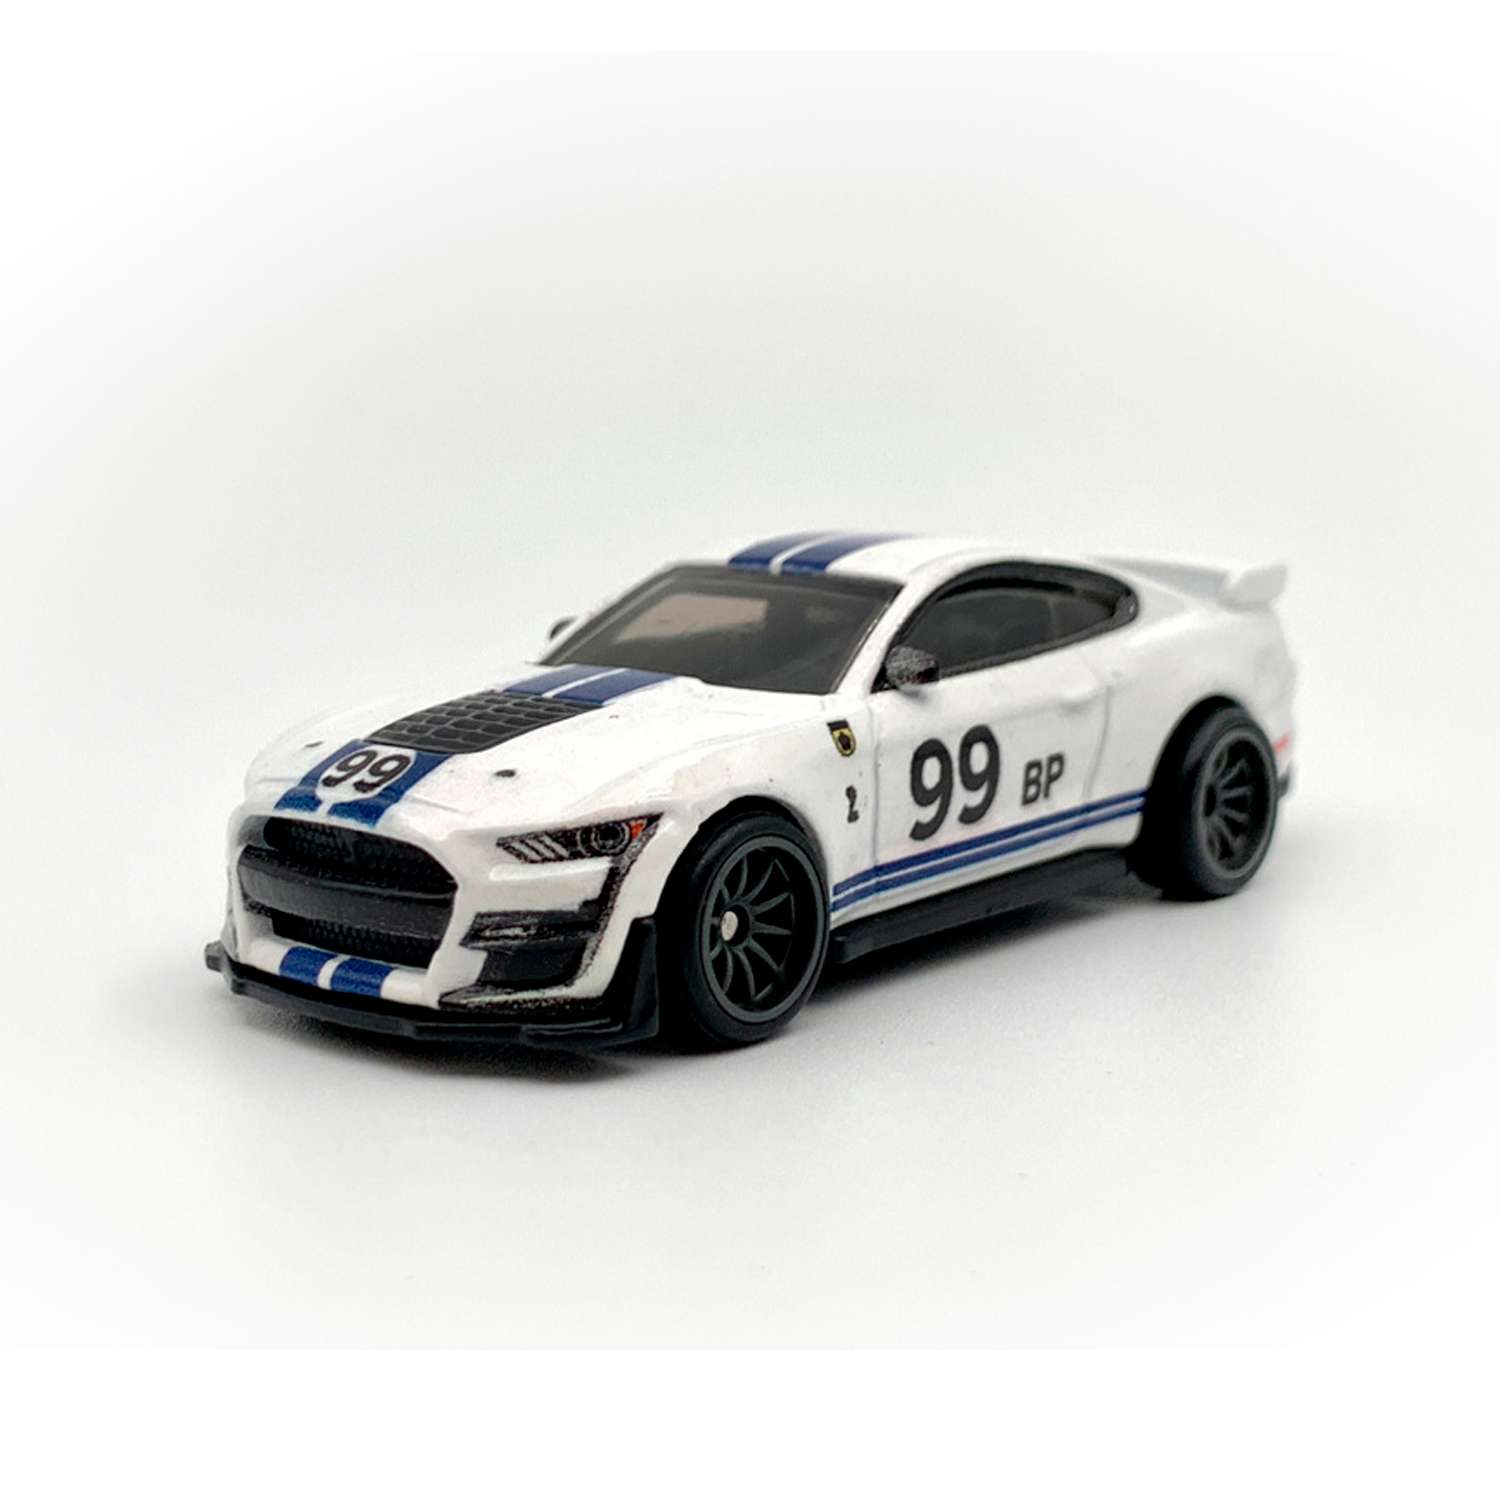 Игрушечная машинка Hot Wheels ford shelby gt50 GJT68-A66-HKF14 - фото 1